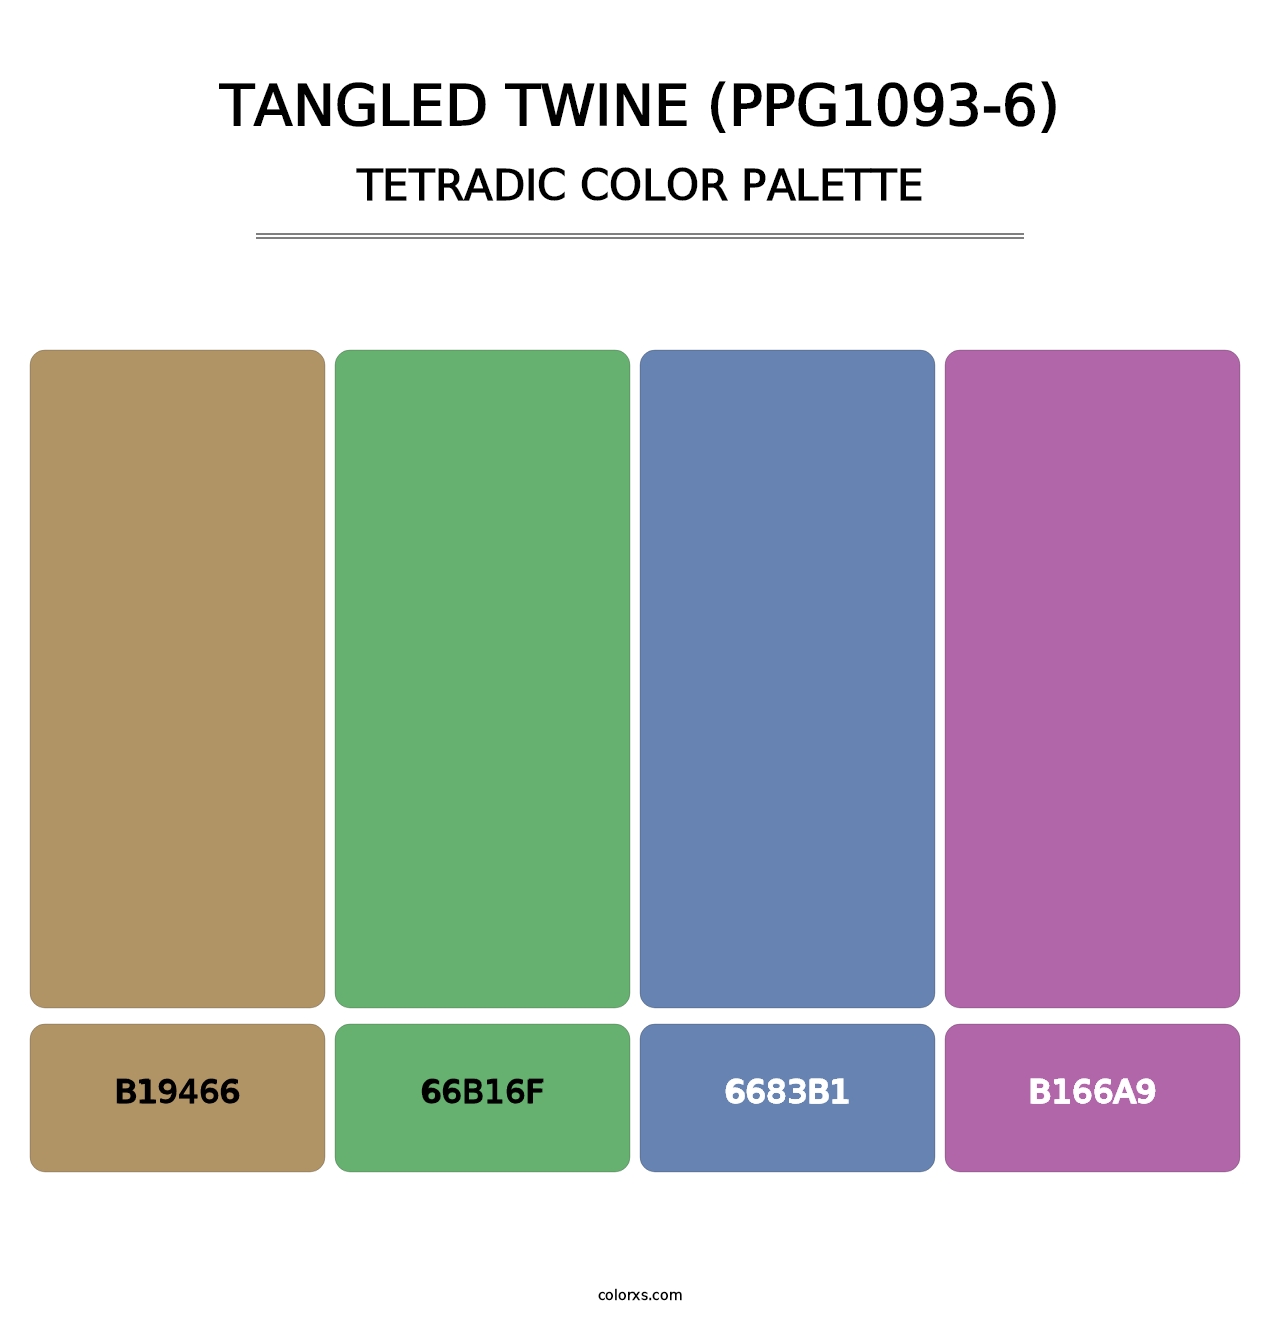 Tangled Twine (PPG1093-6) - Tetradic Color Palette